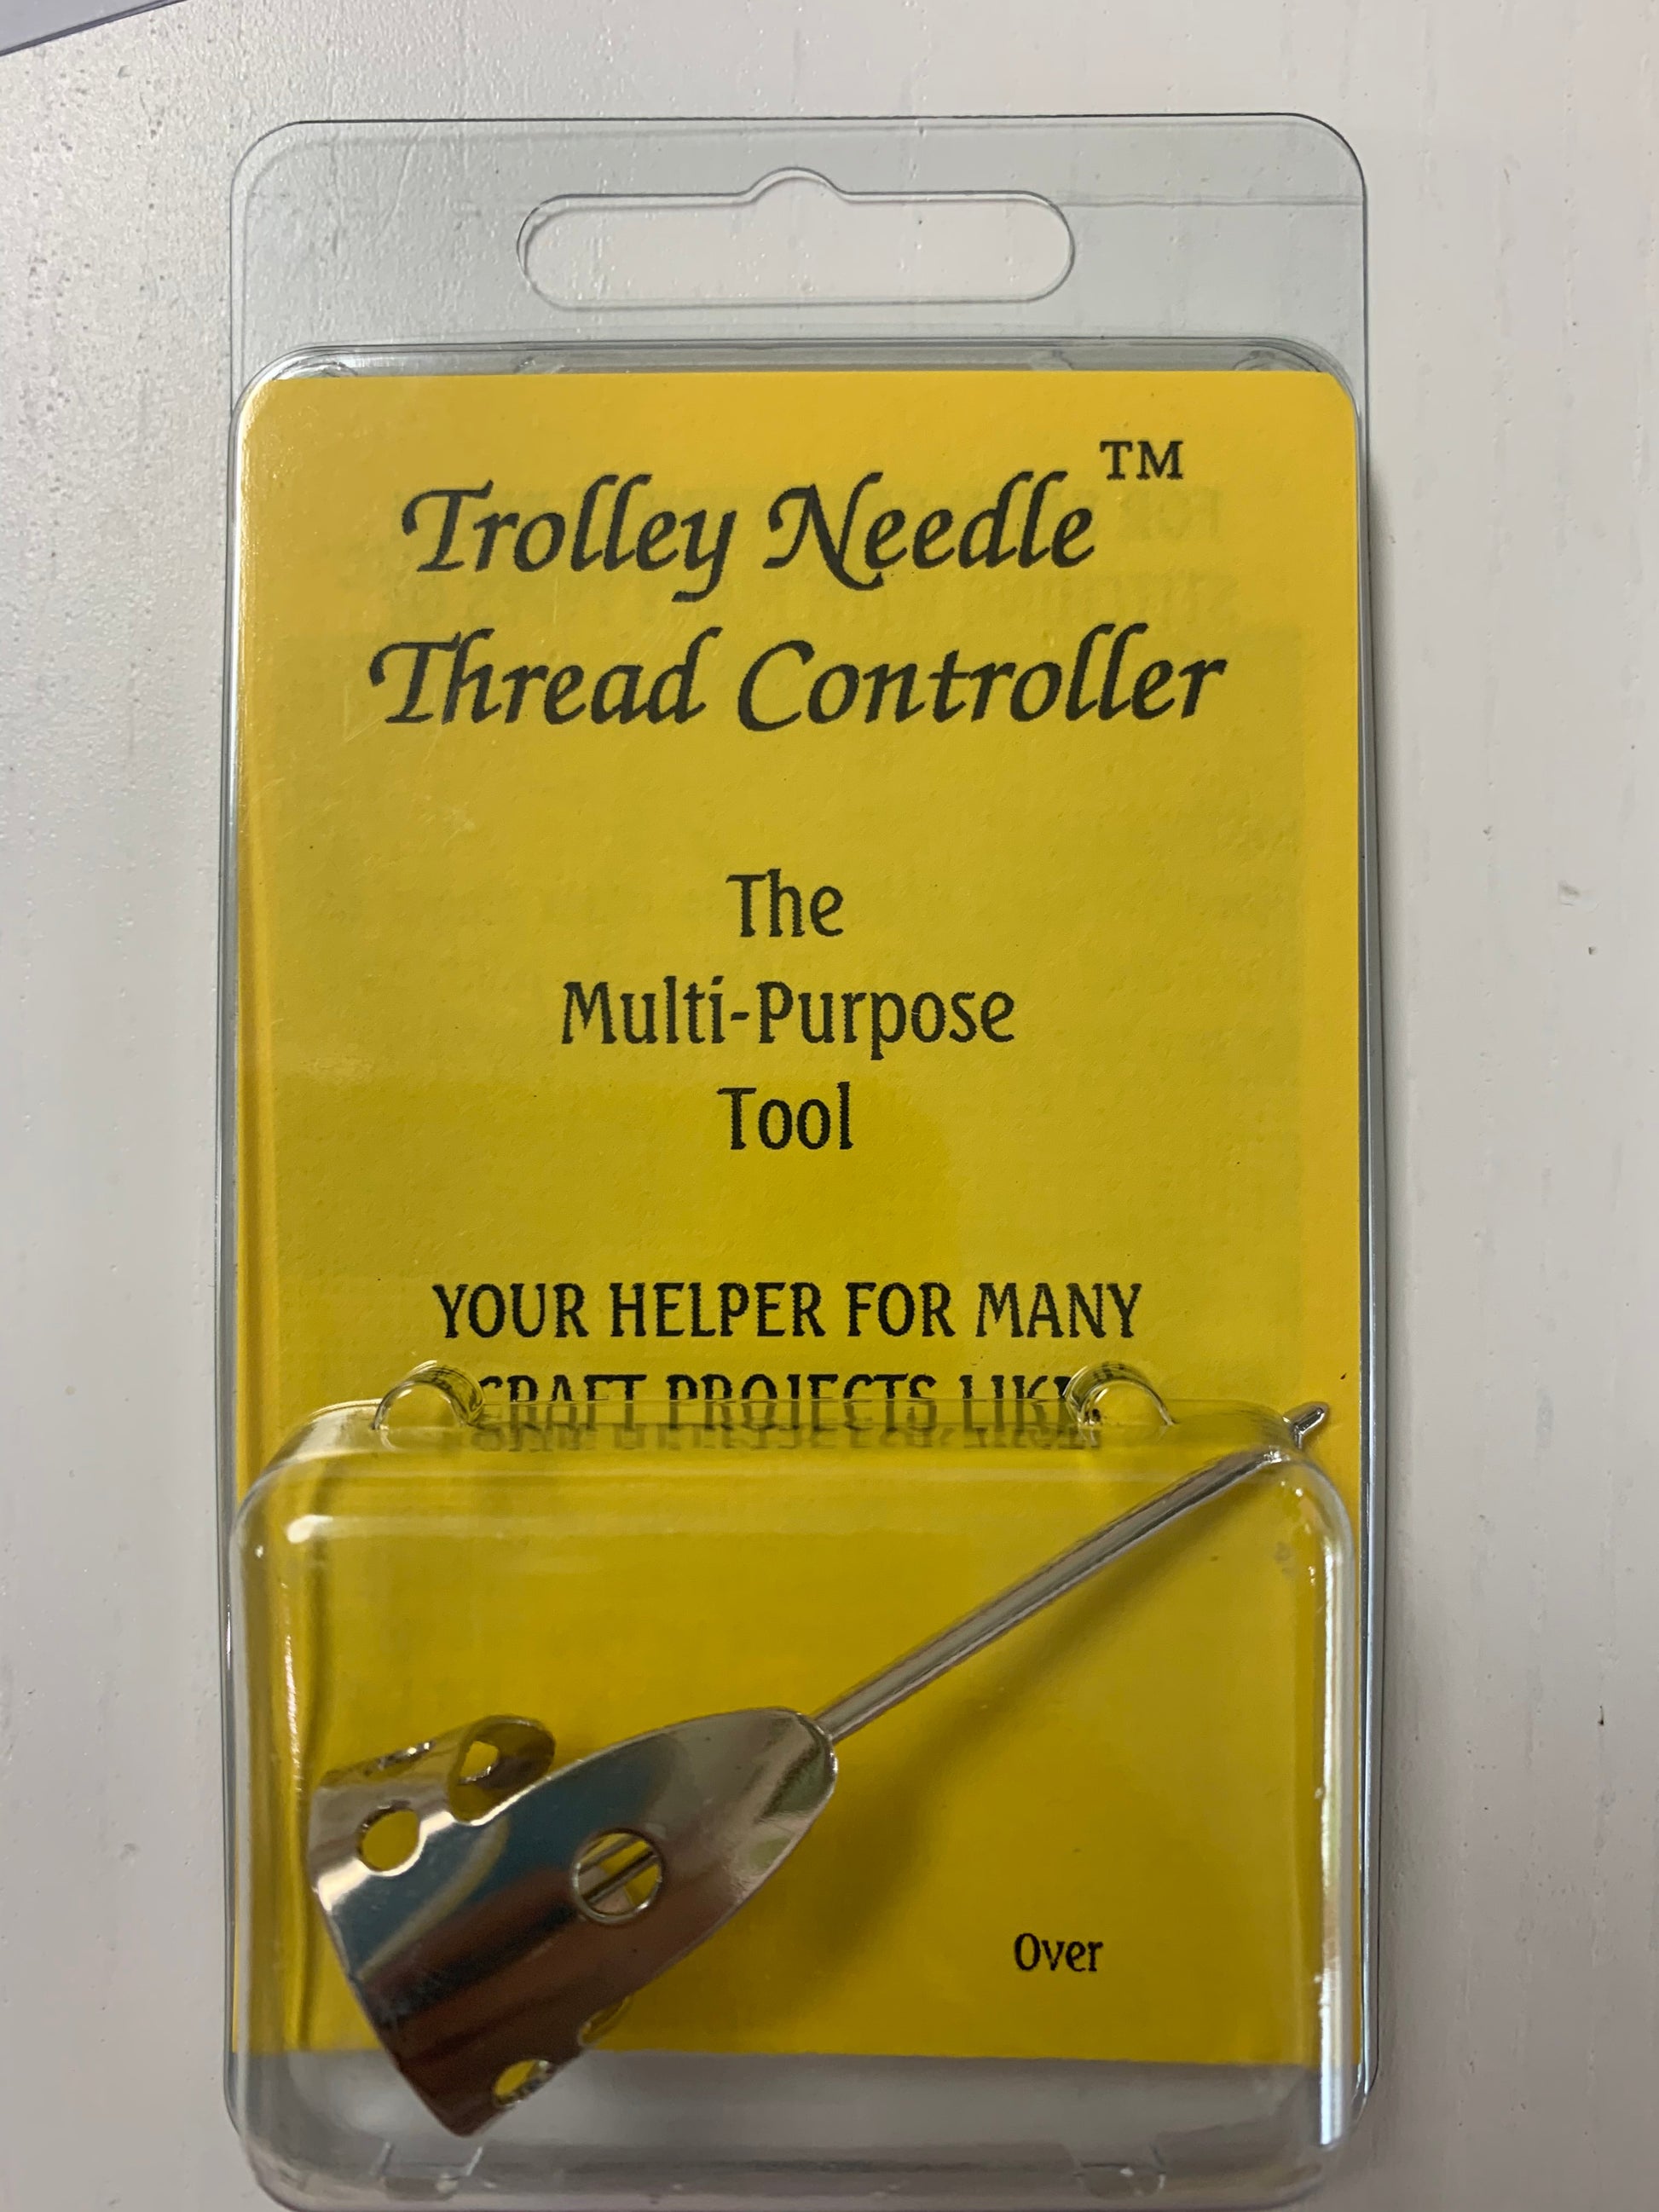 Trolley Needle Thread Controller Art & Crafting Tool Accessories